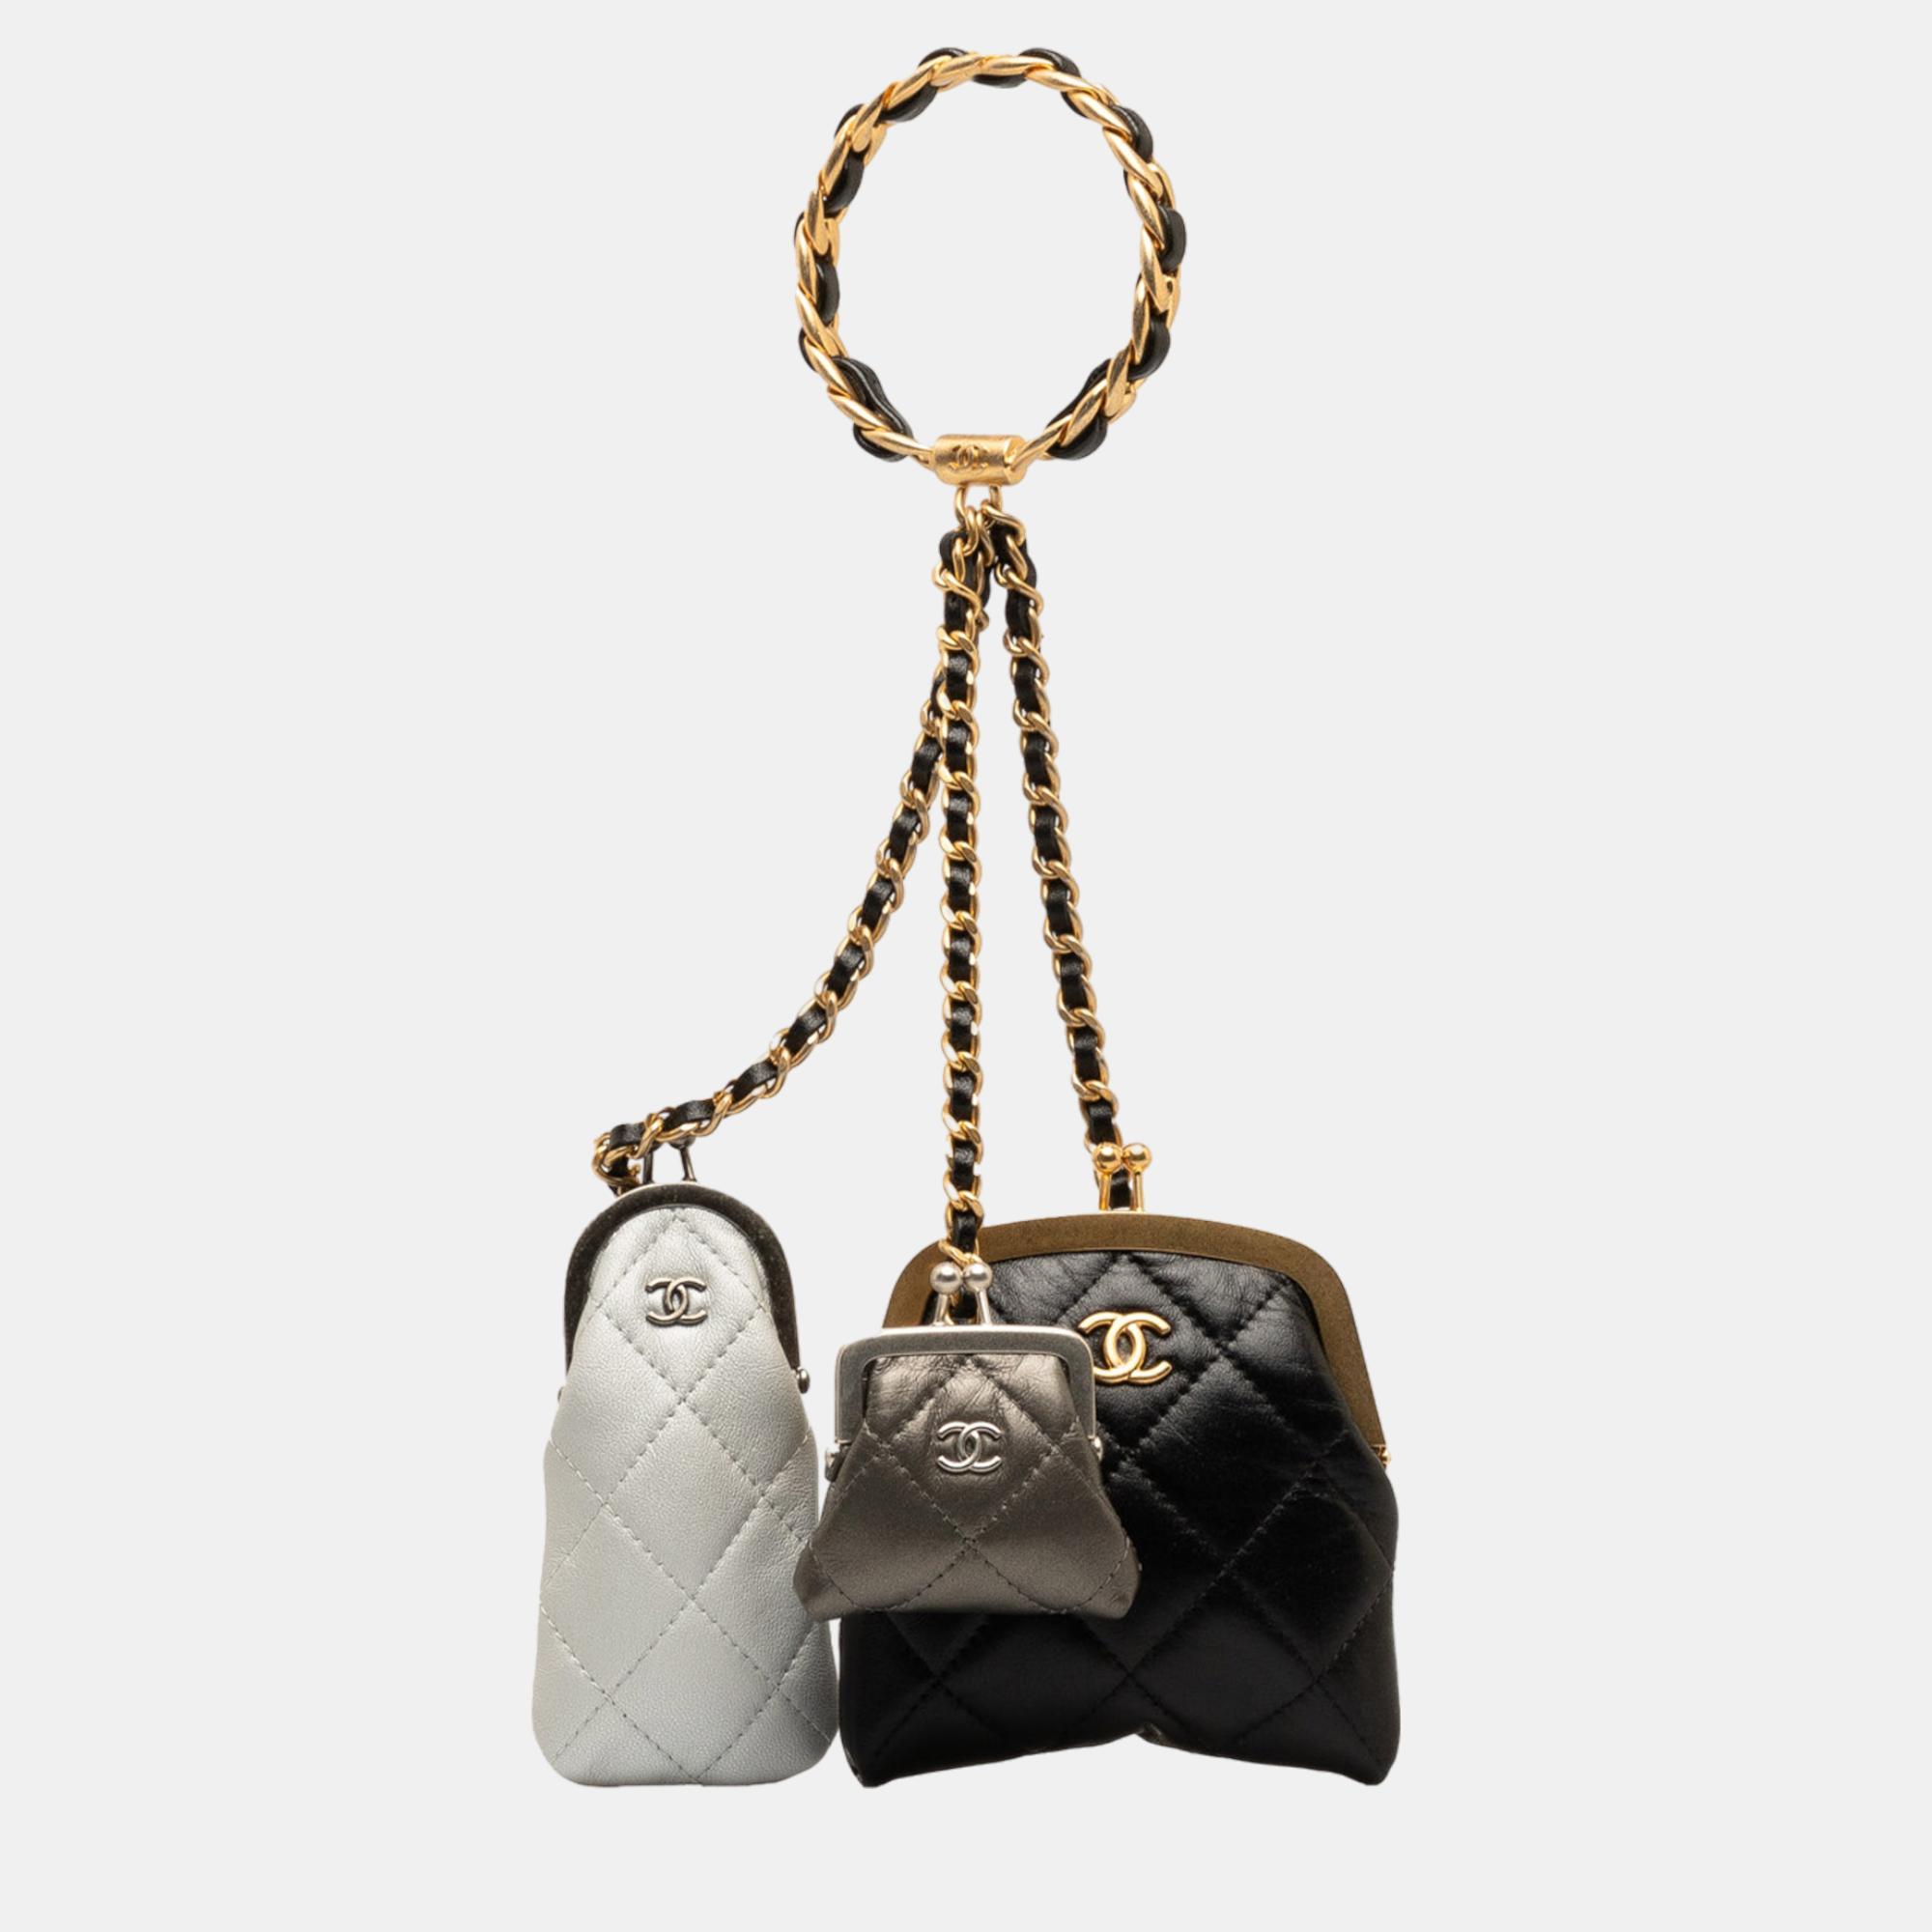 Chanel black quilted lambskin multi clutch with handle